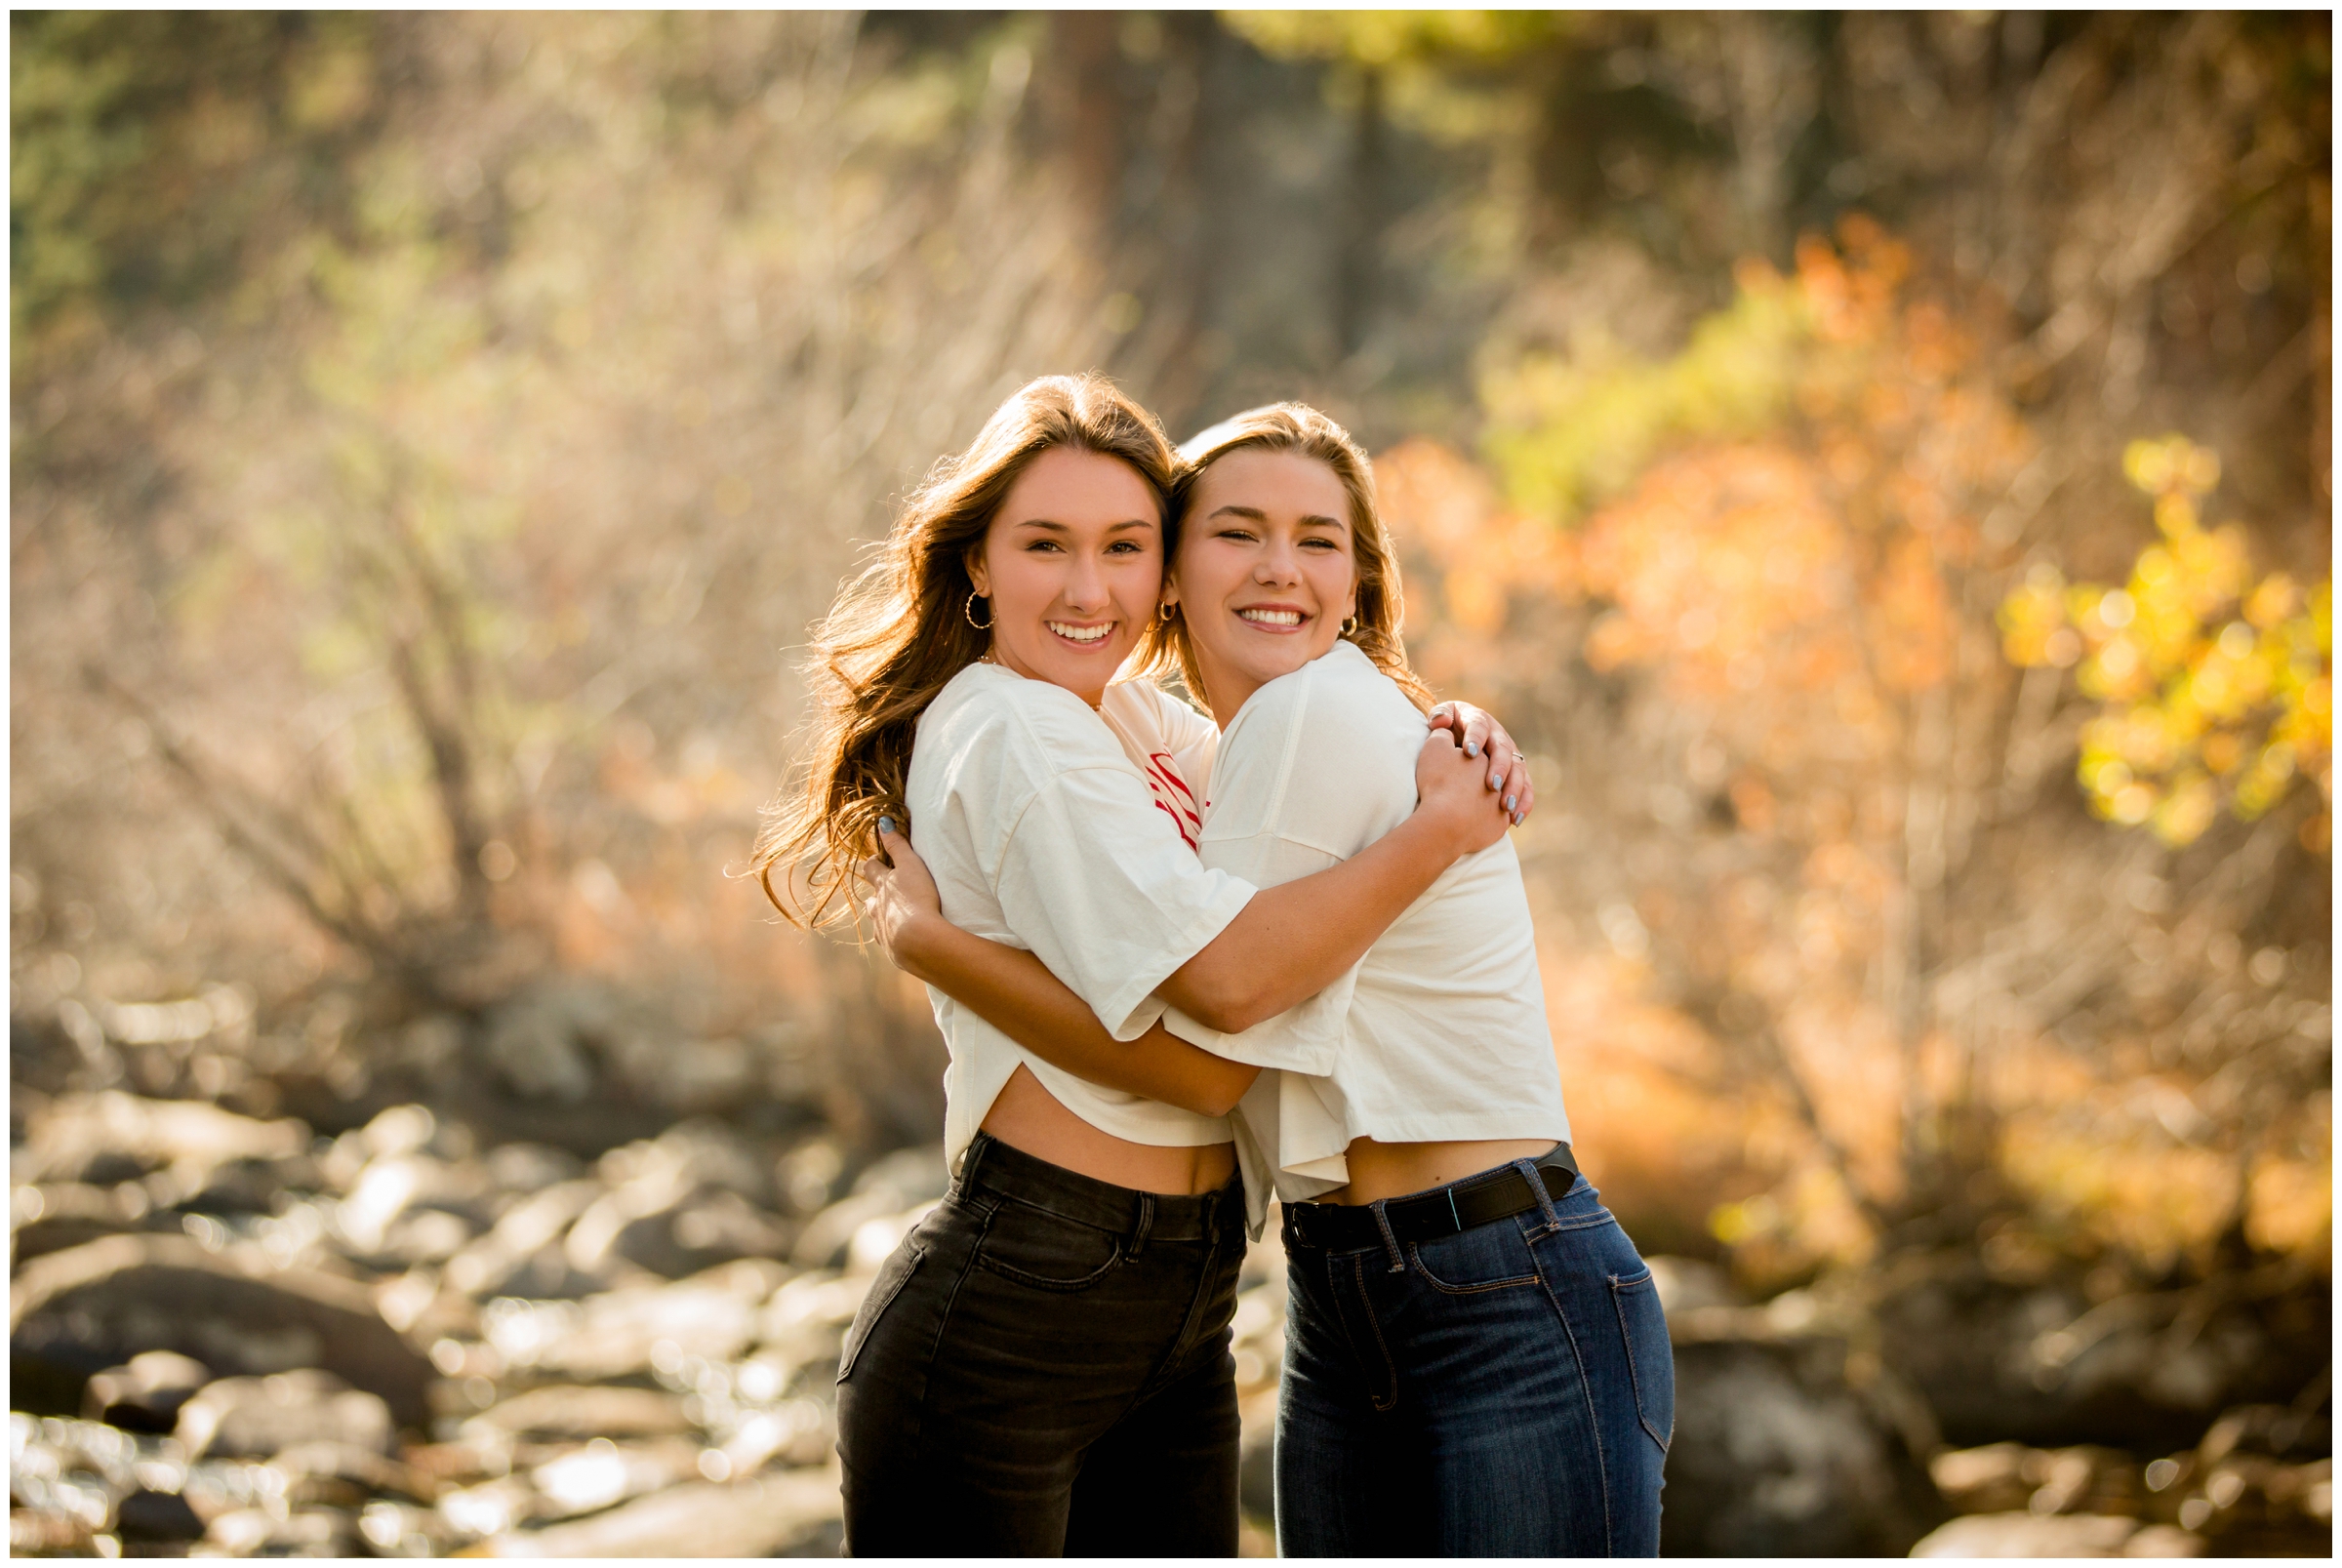 best friends photography session by river in Estes Park Colorado 